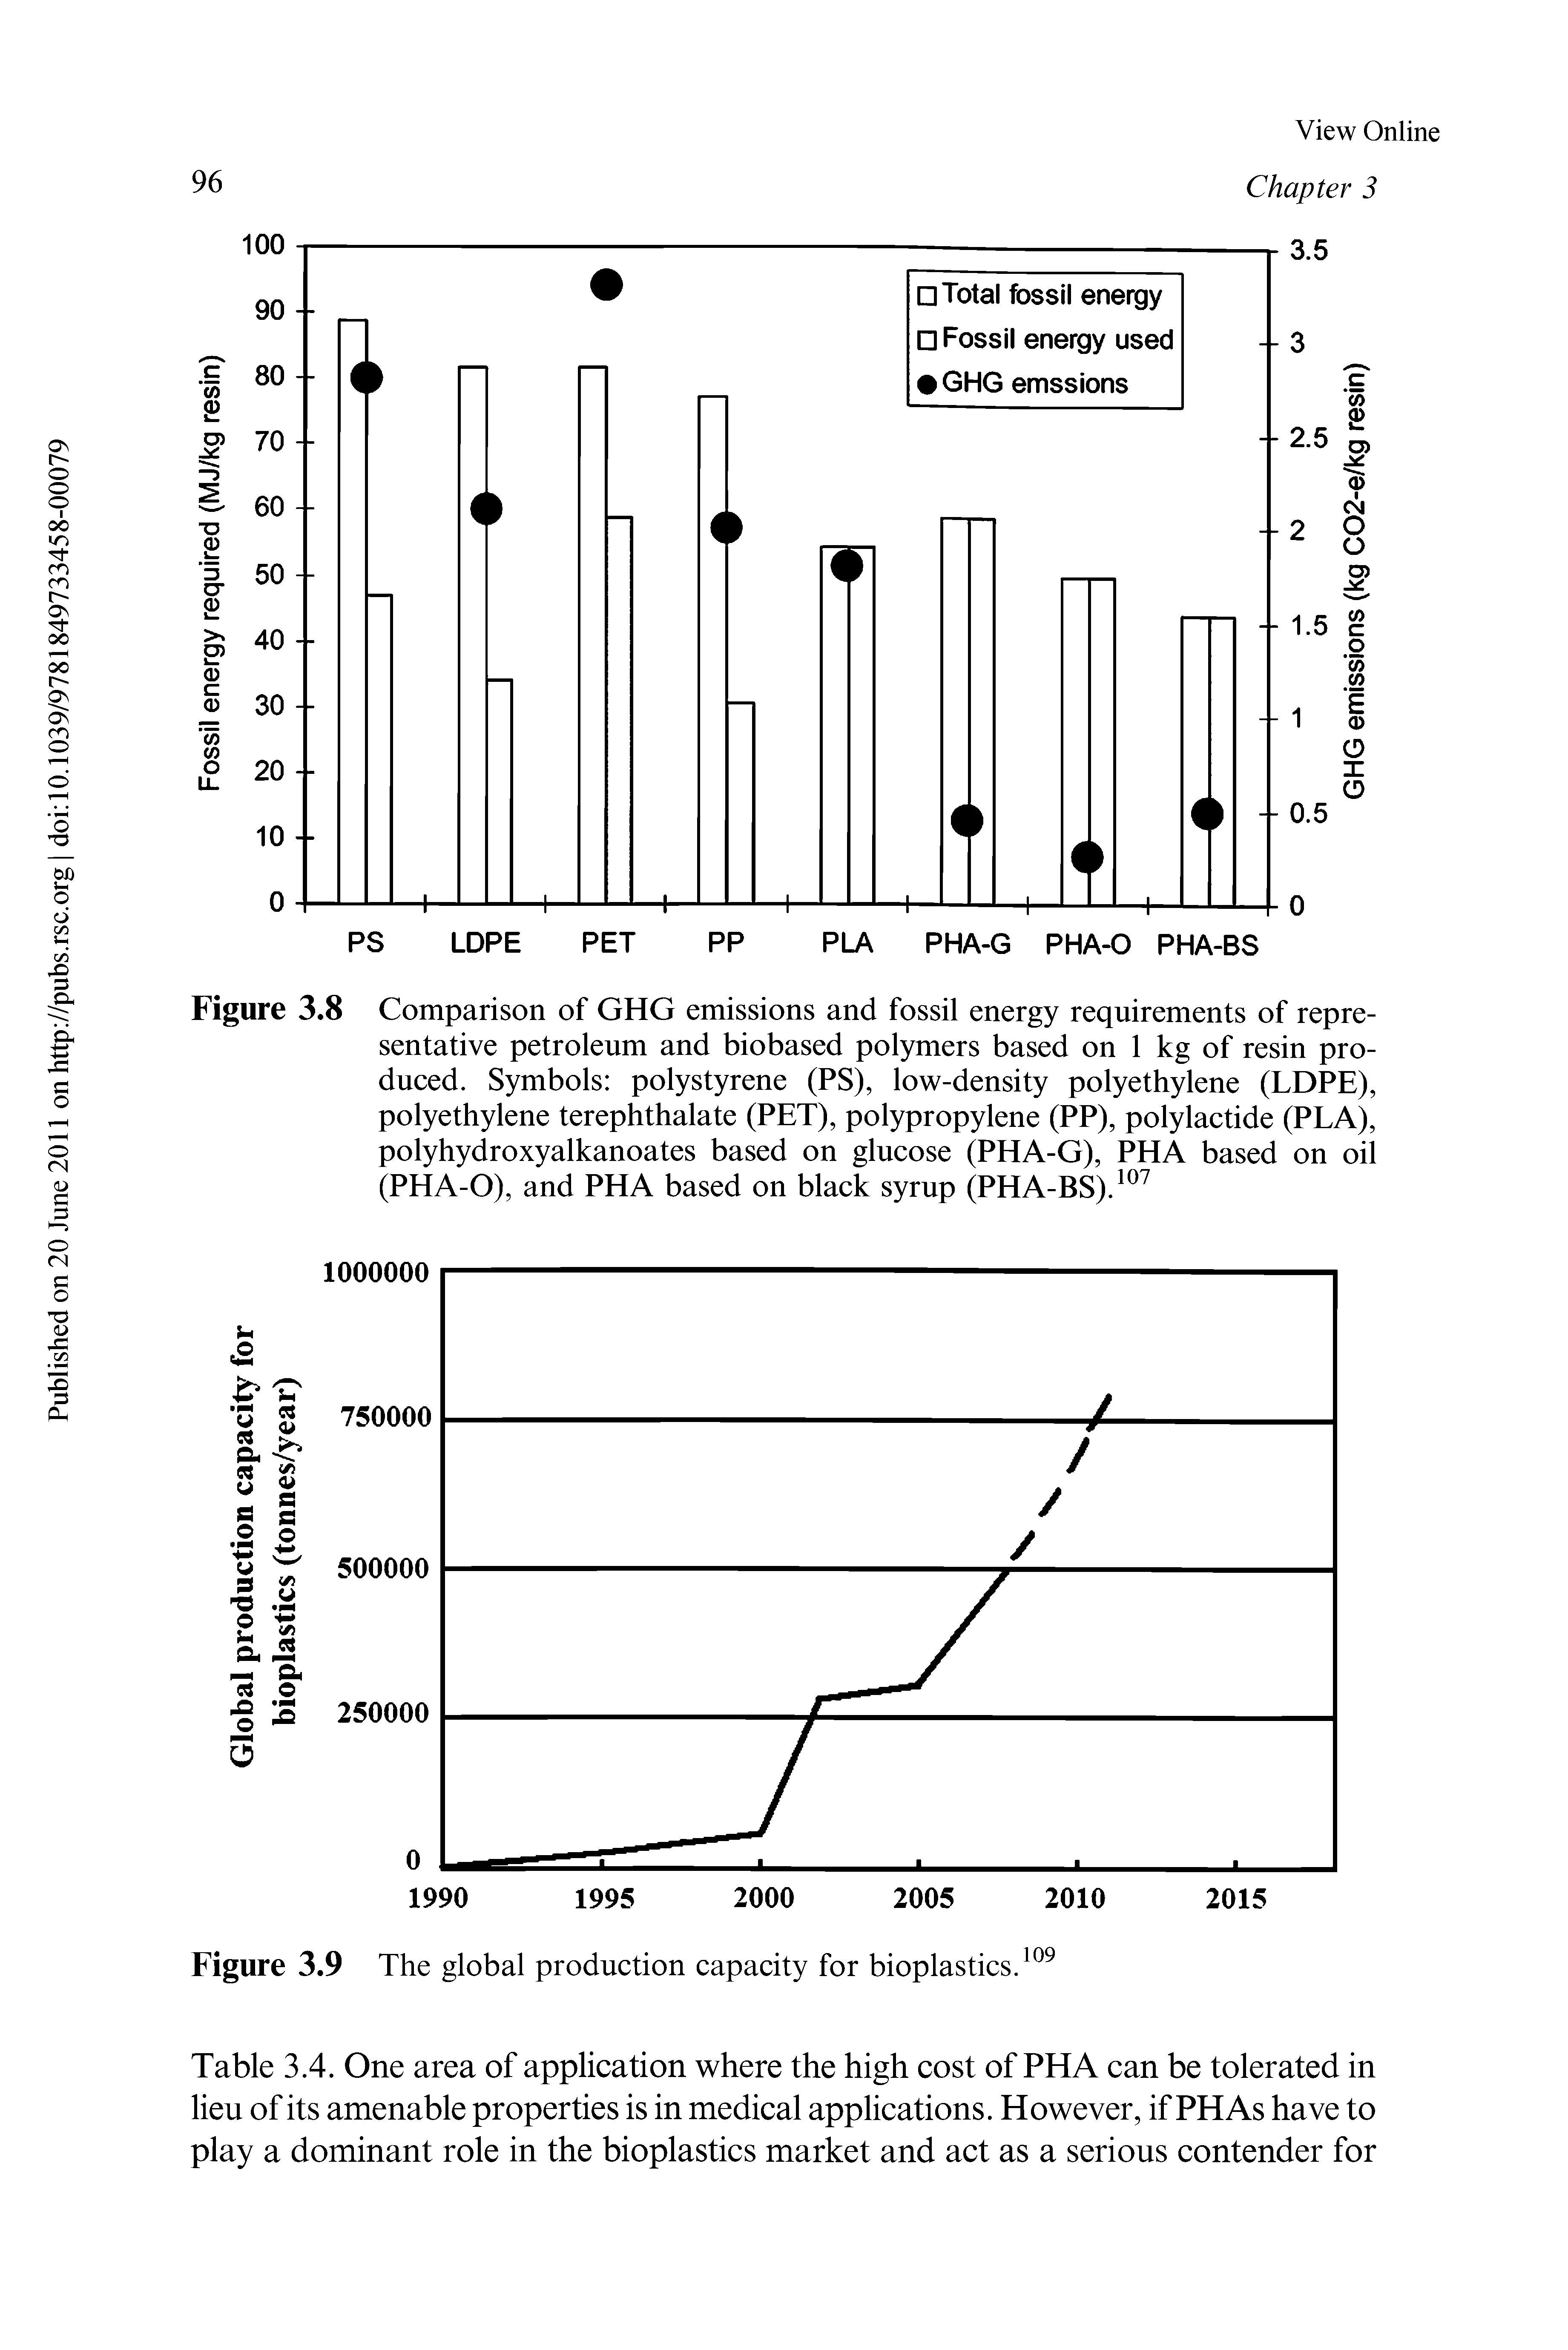 Figure 3.8 Comparison of GHG emissions and fossil energy requirements of representative petroleum and biobased polymers based on 1 kg of resin produced. Symbols polystyrene (PS), low-density polyethylene (LDPE), polyethylene terephthalate (PET), polypropylene (PP), polylactide (PLA), polyhydroxyalkanoates based on glucose (PHA-G), PHA based on oil (PHA-0), and PHA based on black syrup (PHA-BS).